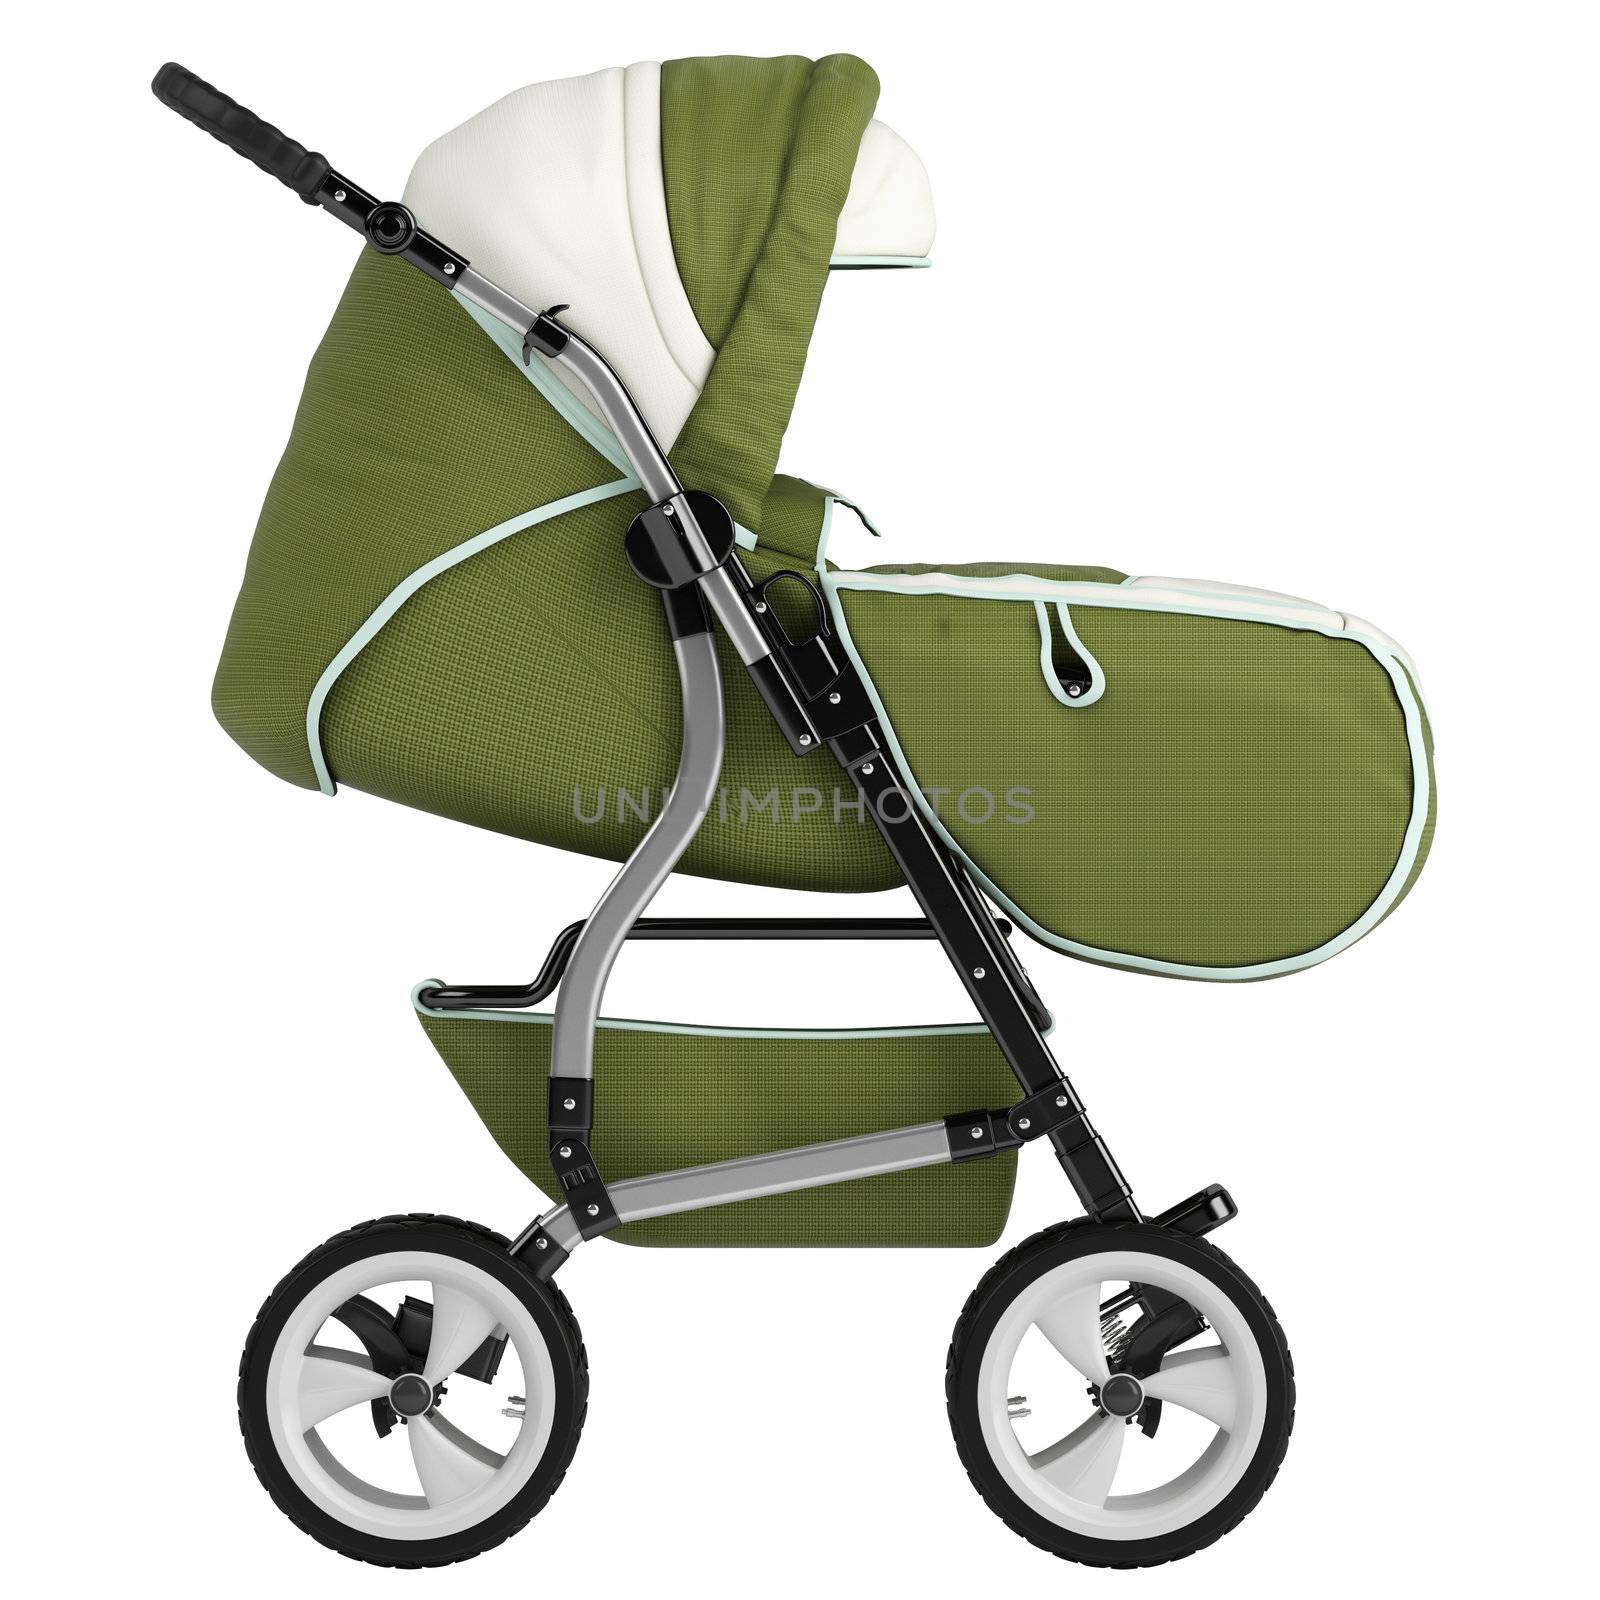 Isolated baby pram with an upholstered cover and hood for taking the baby out for a stroll or walk isolated on white